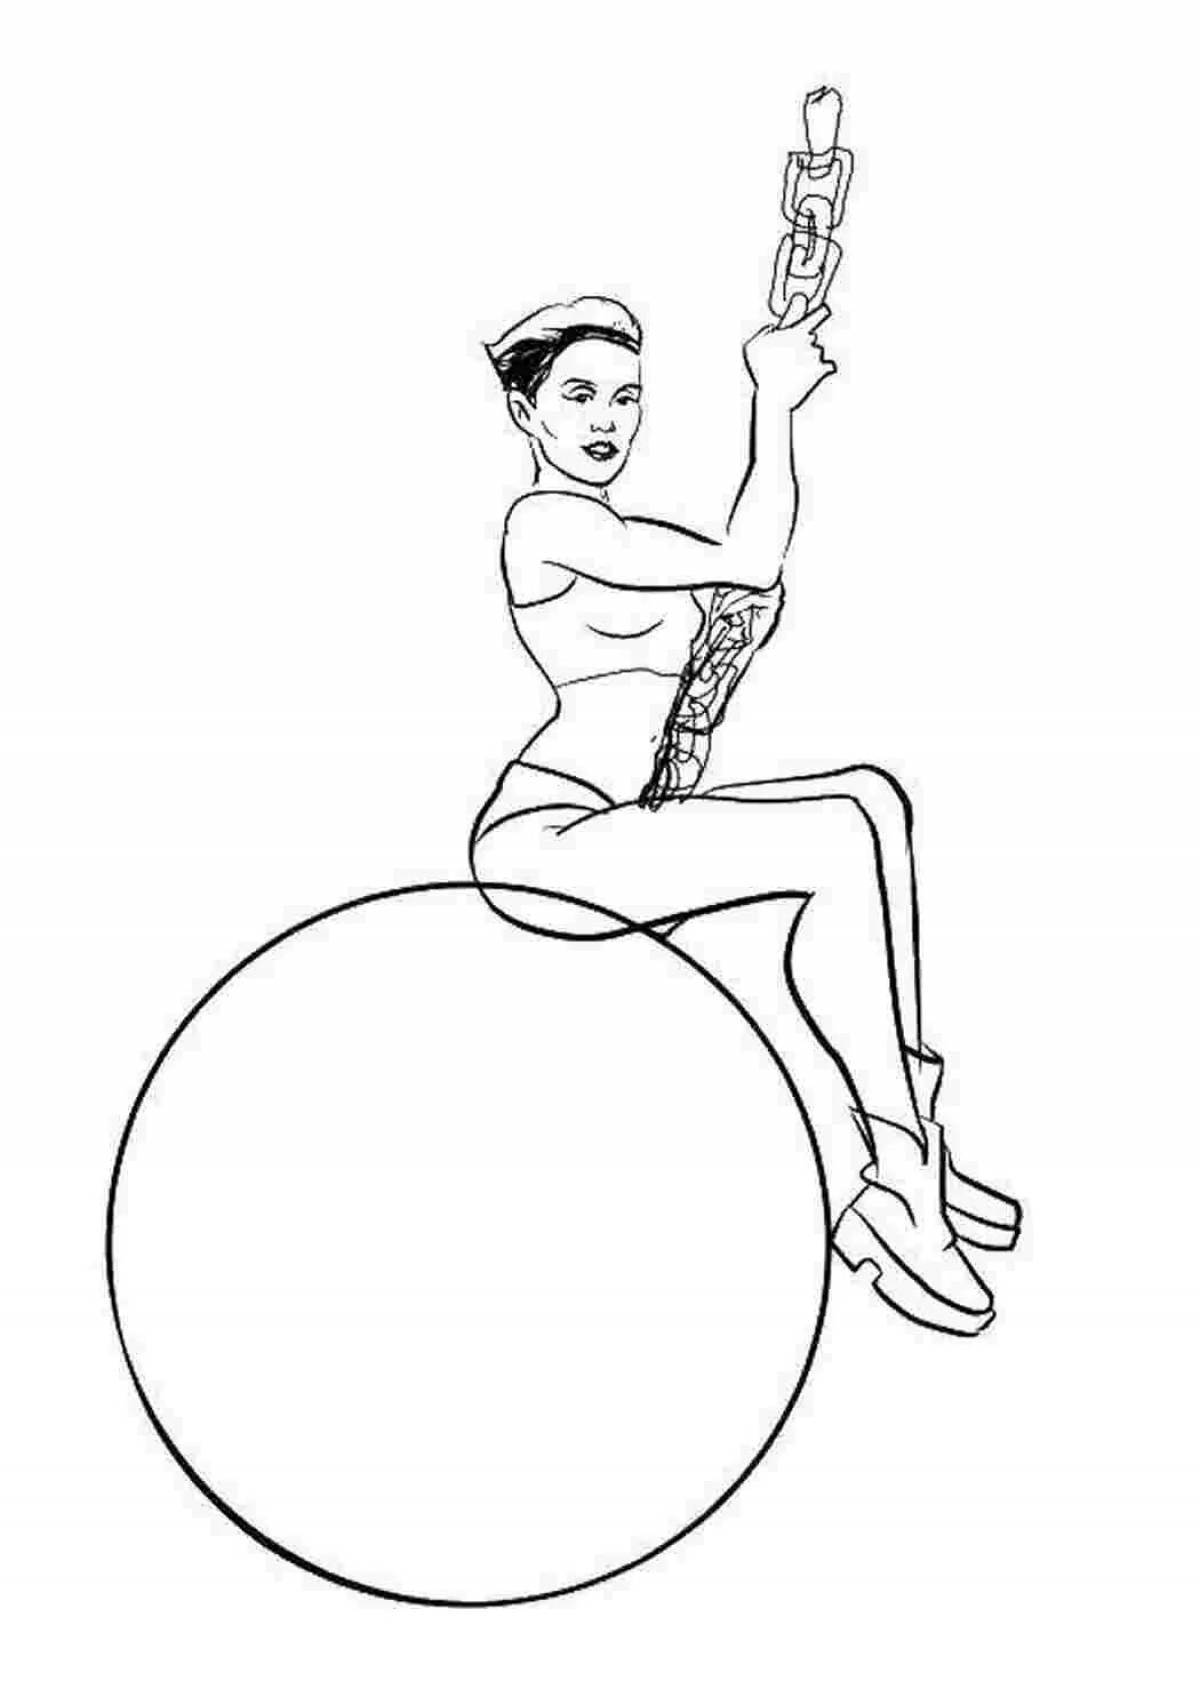 Miley Cyrus lovely coloring page